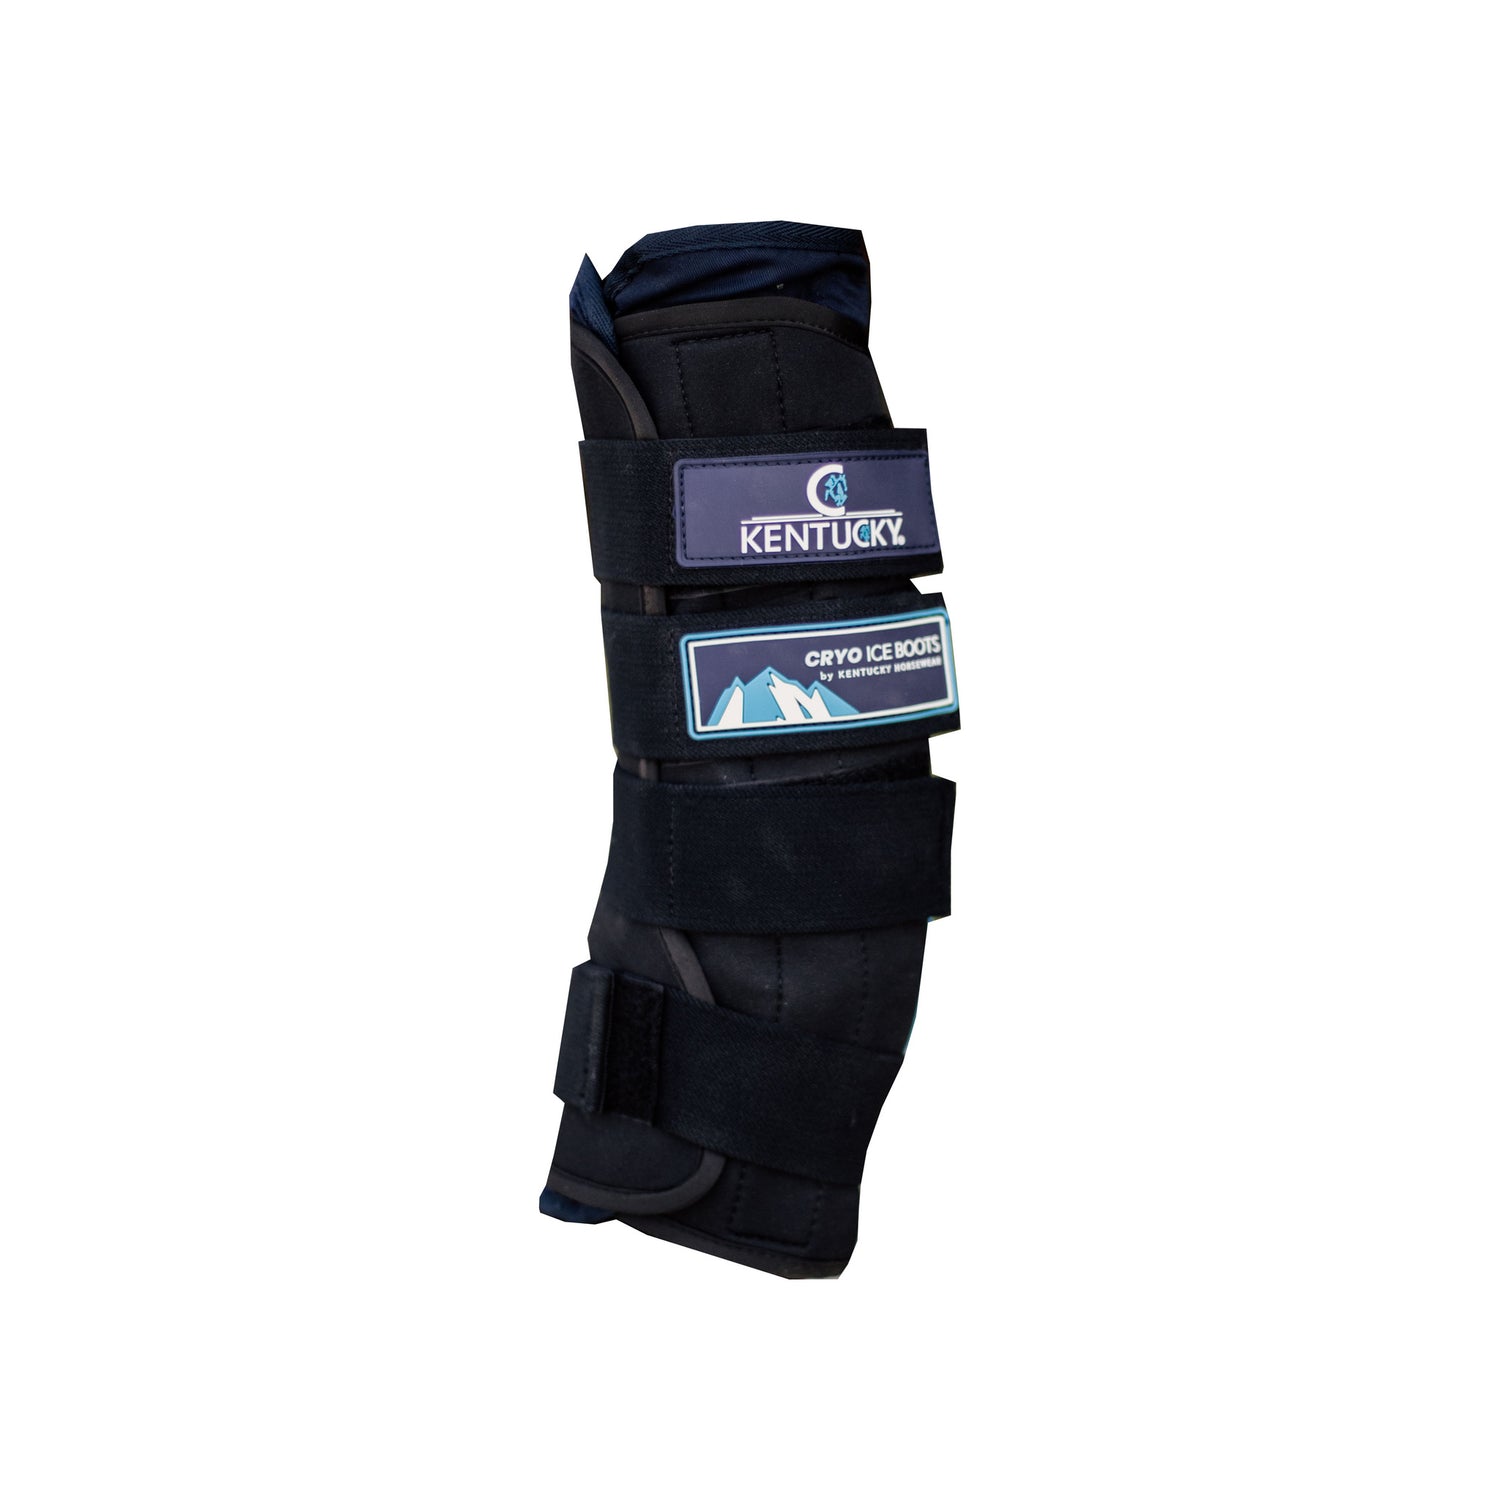 The Cryo ice boots are the ideal cooling boots that can be used after exercise or competition to cool down the legs of your horse. The boots are anatomically shaped and have a removable Cryo gel pack.